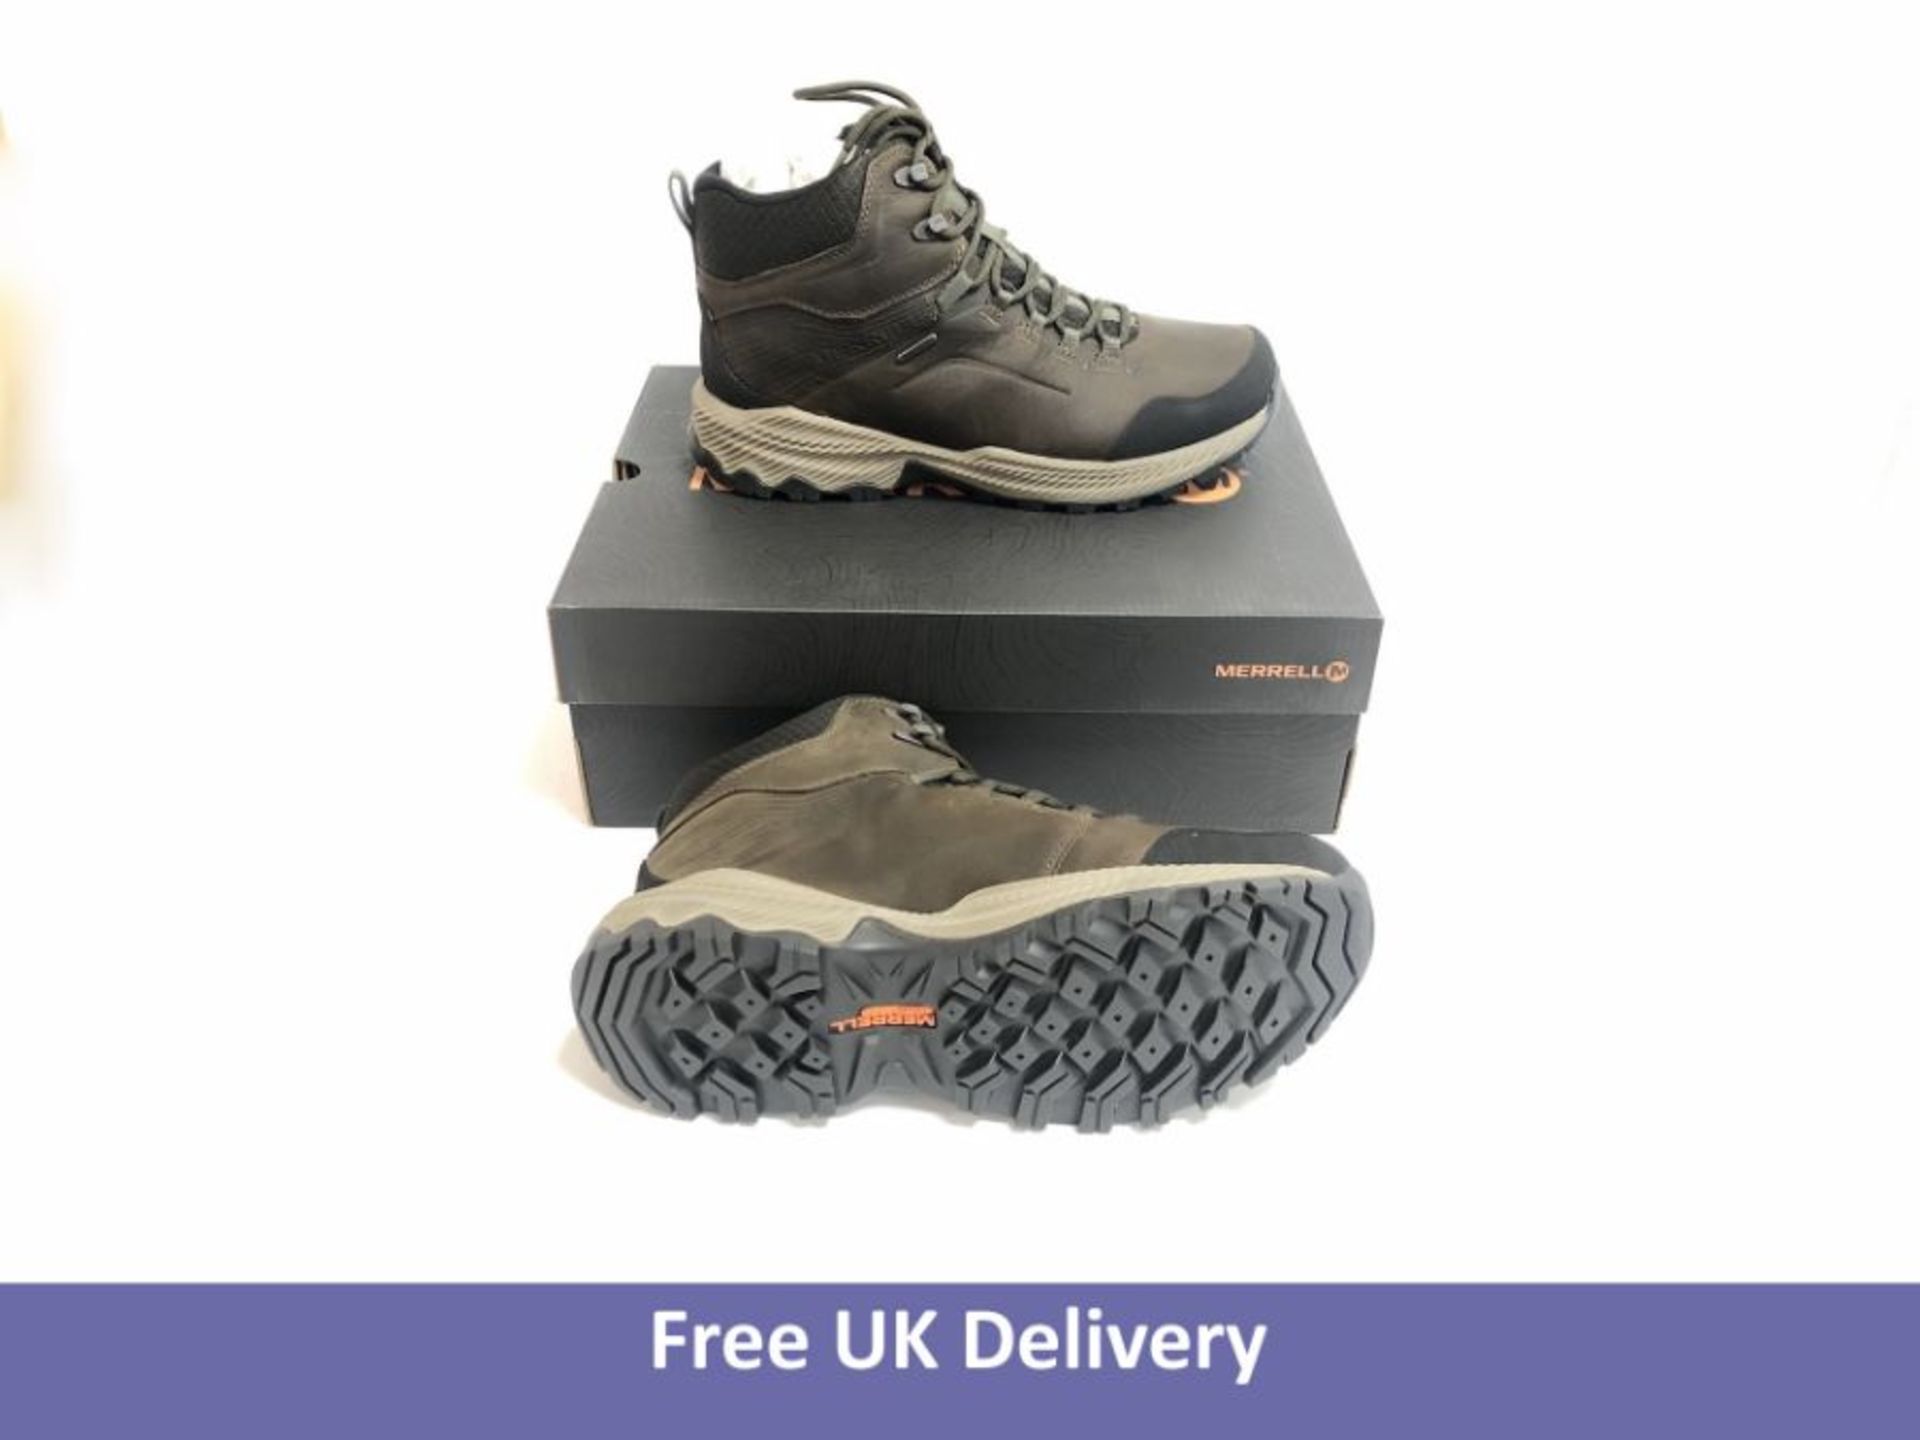 Merrell Women's Forestbound Hiking Boots, UK 9